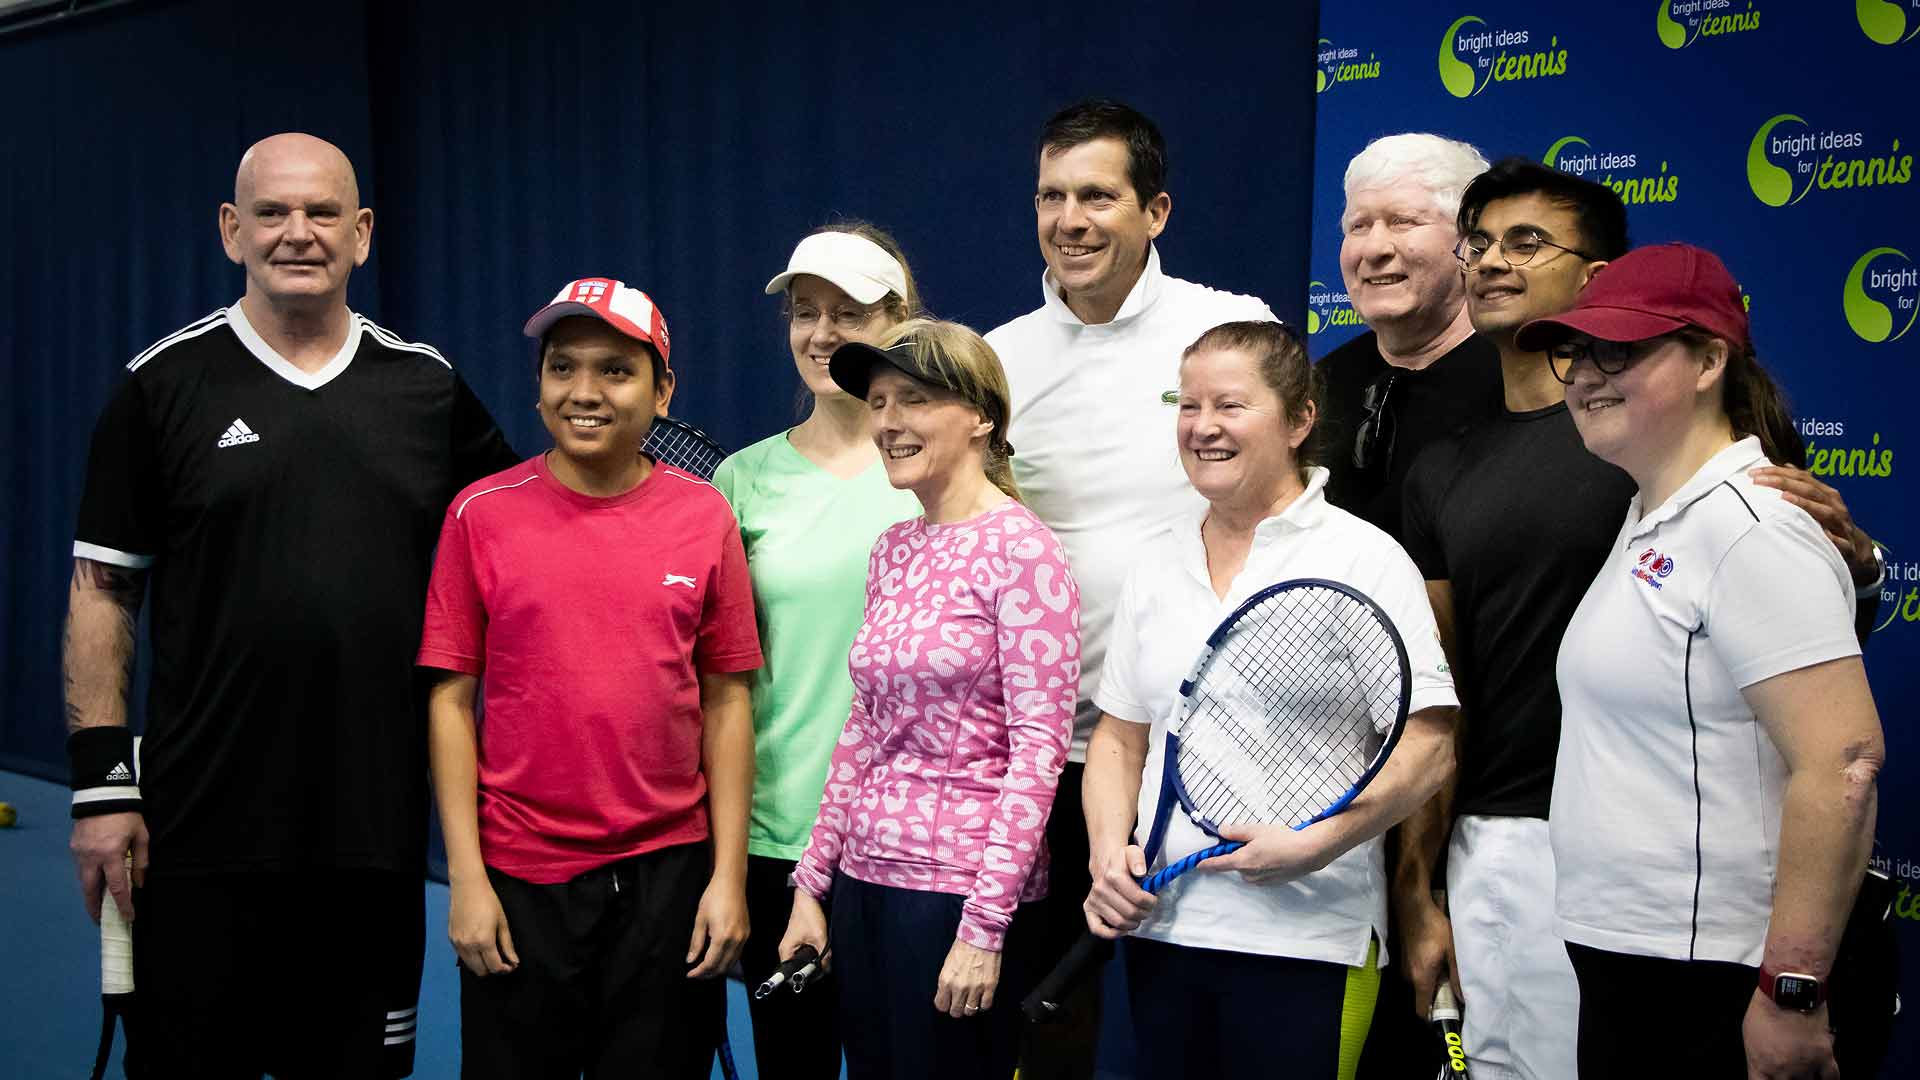 Former World No. 4 Tim Henman is among the former and current British players who participated in the 24-hour tennis marathon.